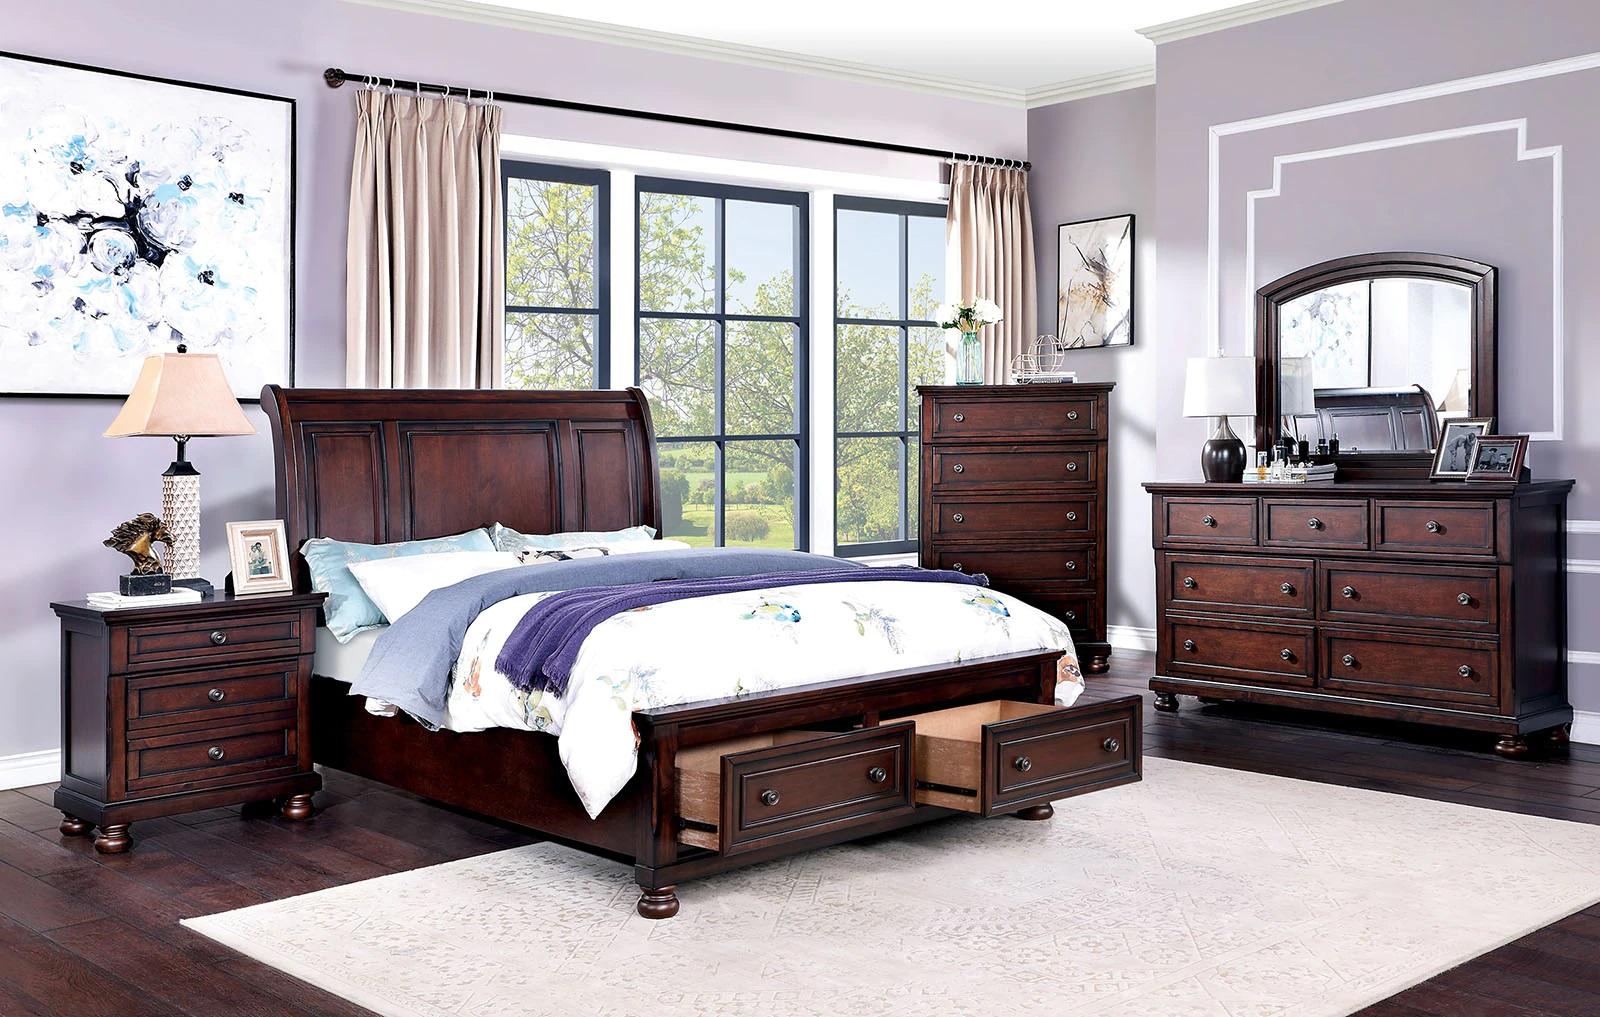 

    
Transitional Dark Cherry Solid Wood King Bedroom Set 5pcs Furniture of America CM7548CH-DR Wells
